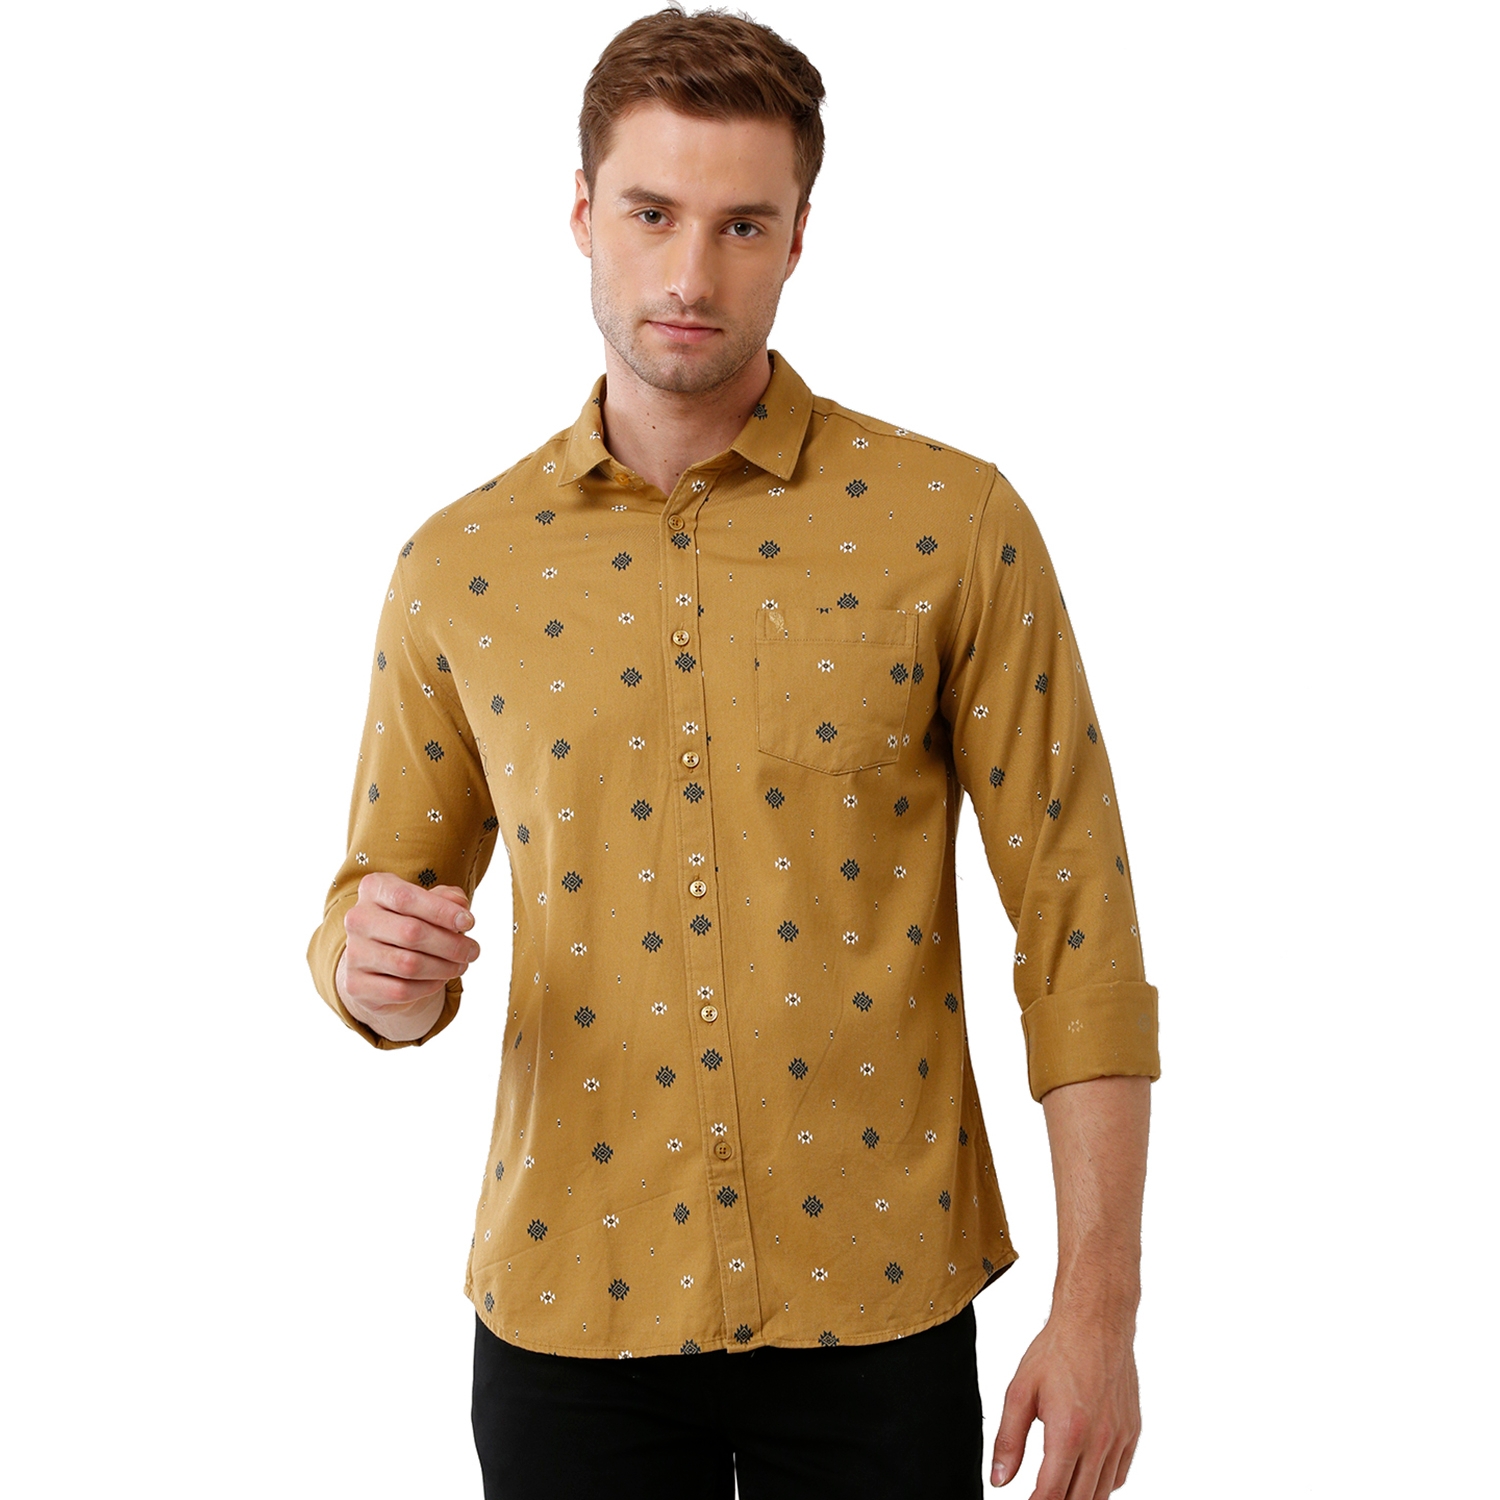 Swiss club | Swiss Club Mens 100% Cotton Printed Full Sleeve Slim Fit Polo Neck Yellow Color Woven Shirt (S-SC-124 A-FS-PRT-BSL)